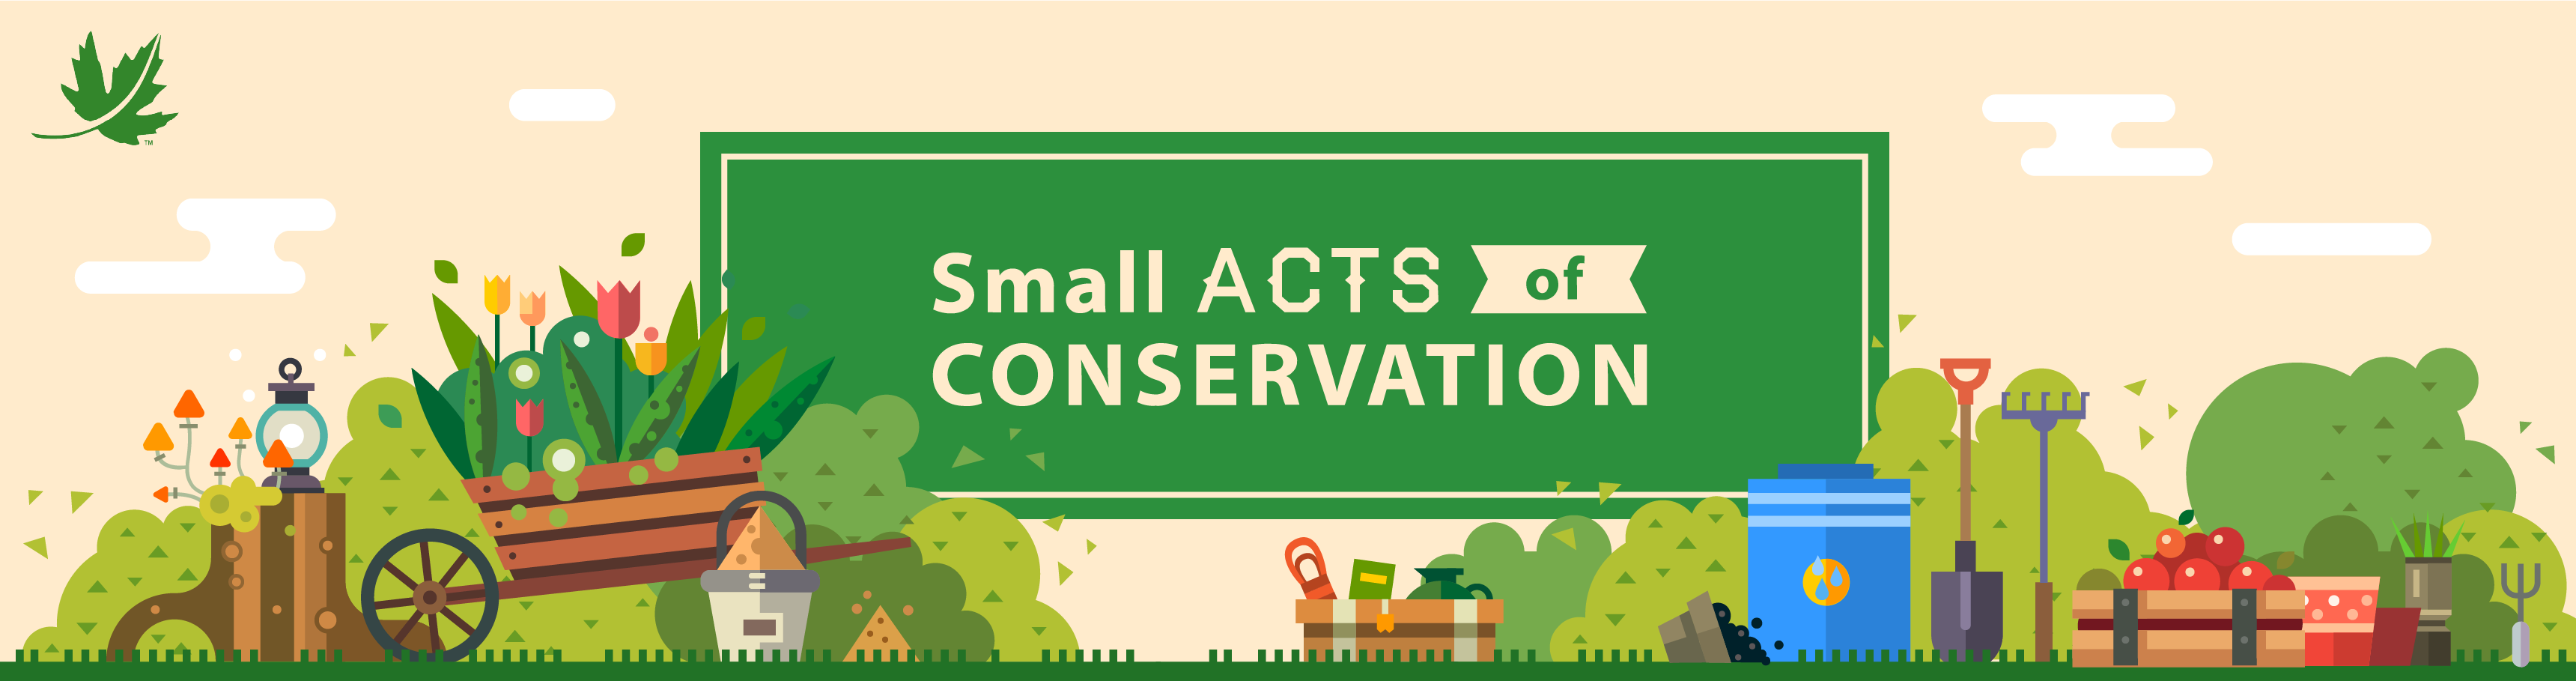 Small Acts of Conservation